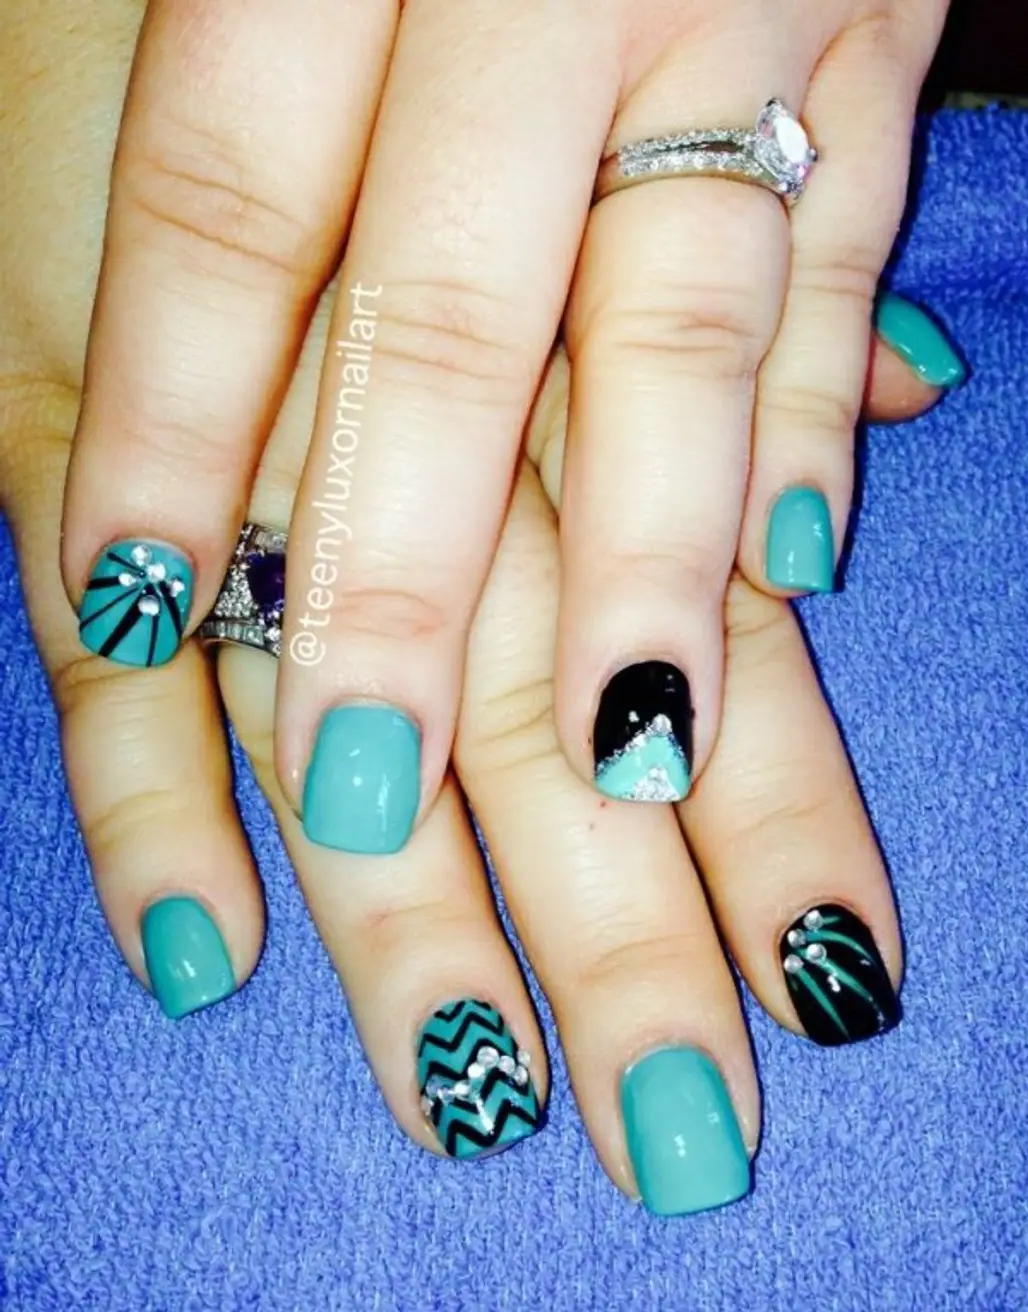 nail,finger,green,nail care,manicure,